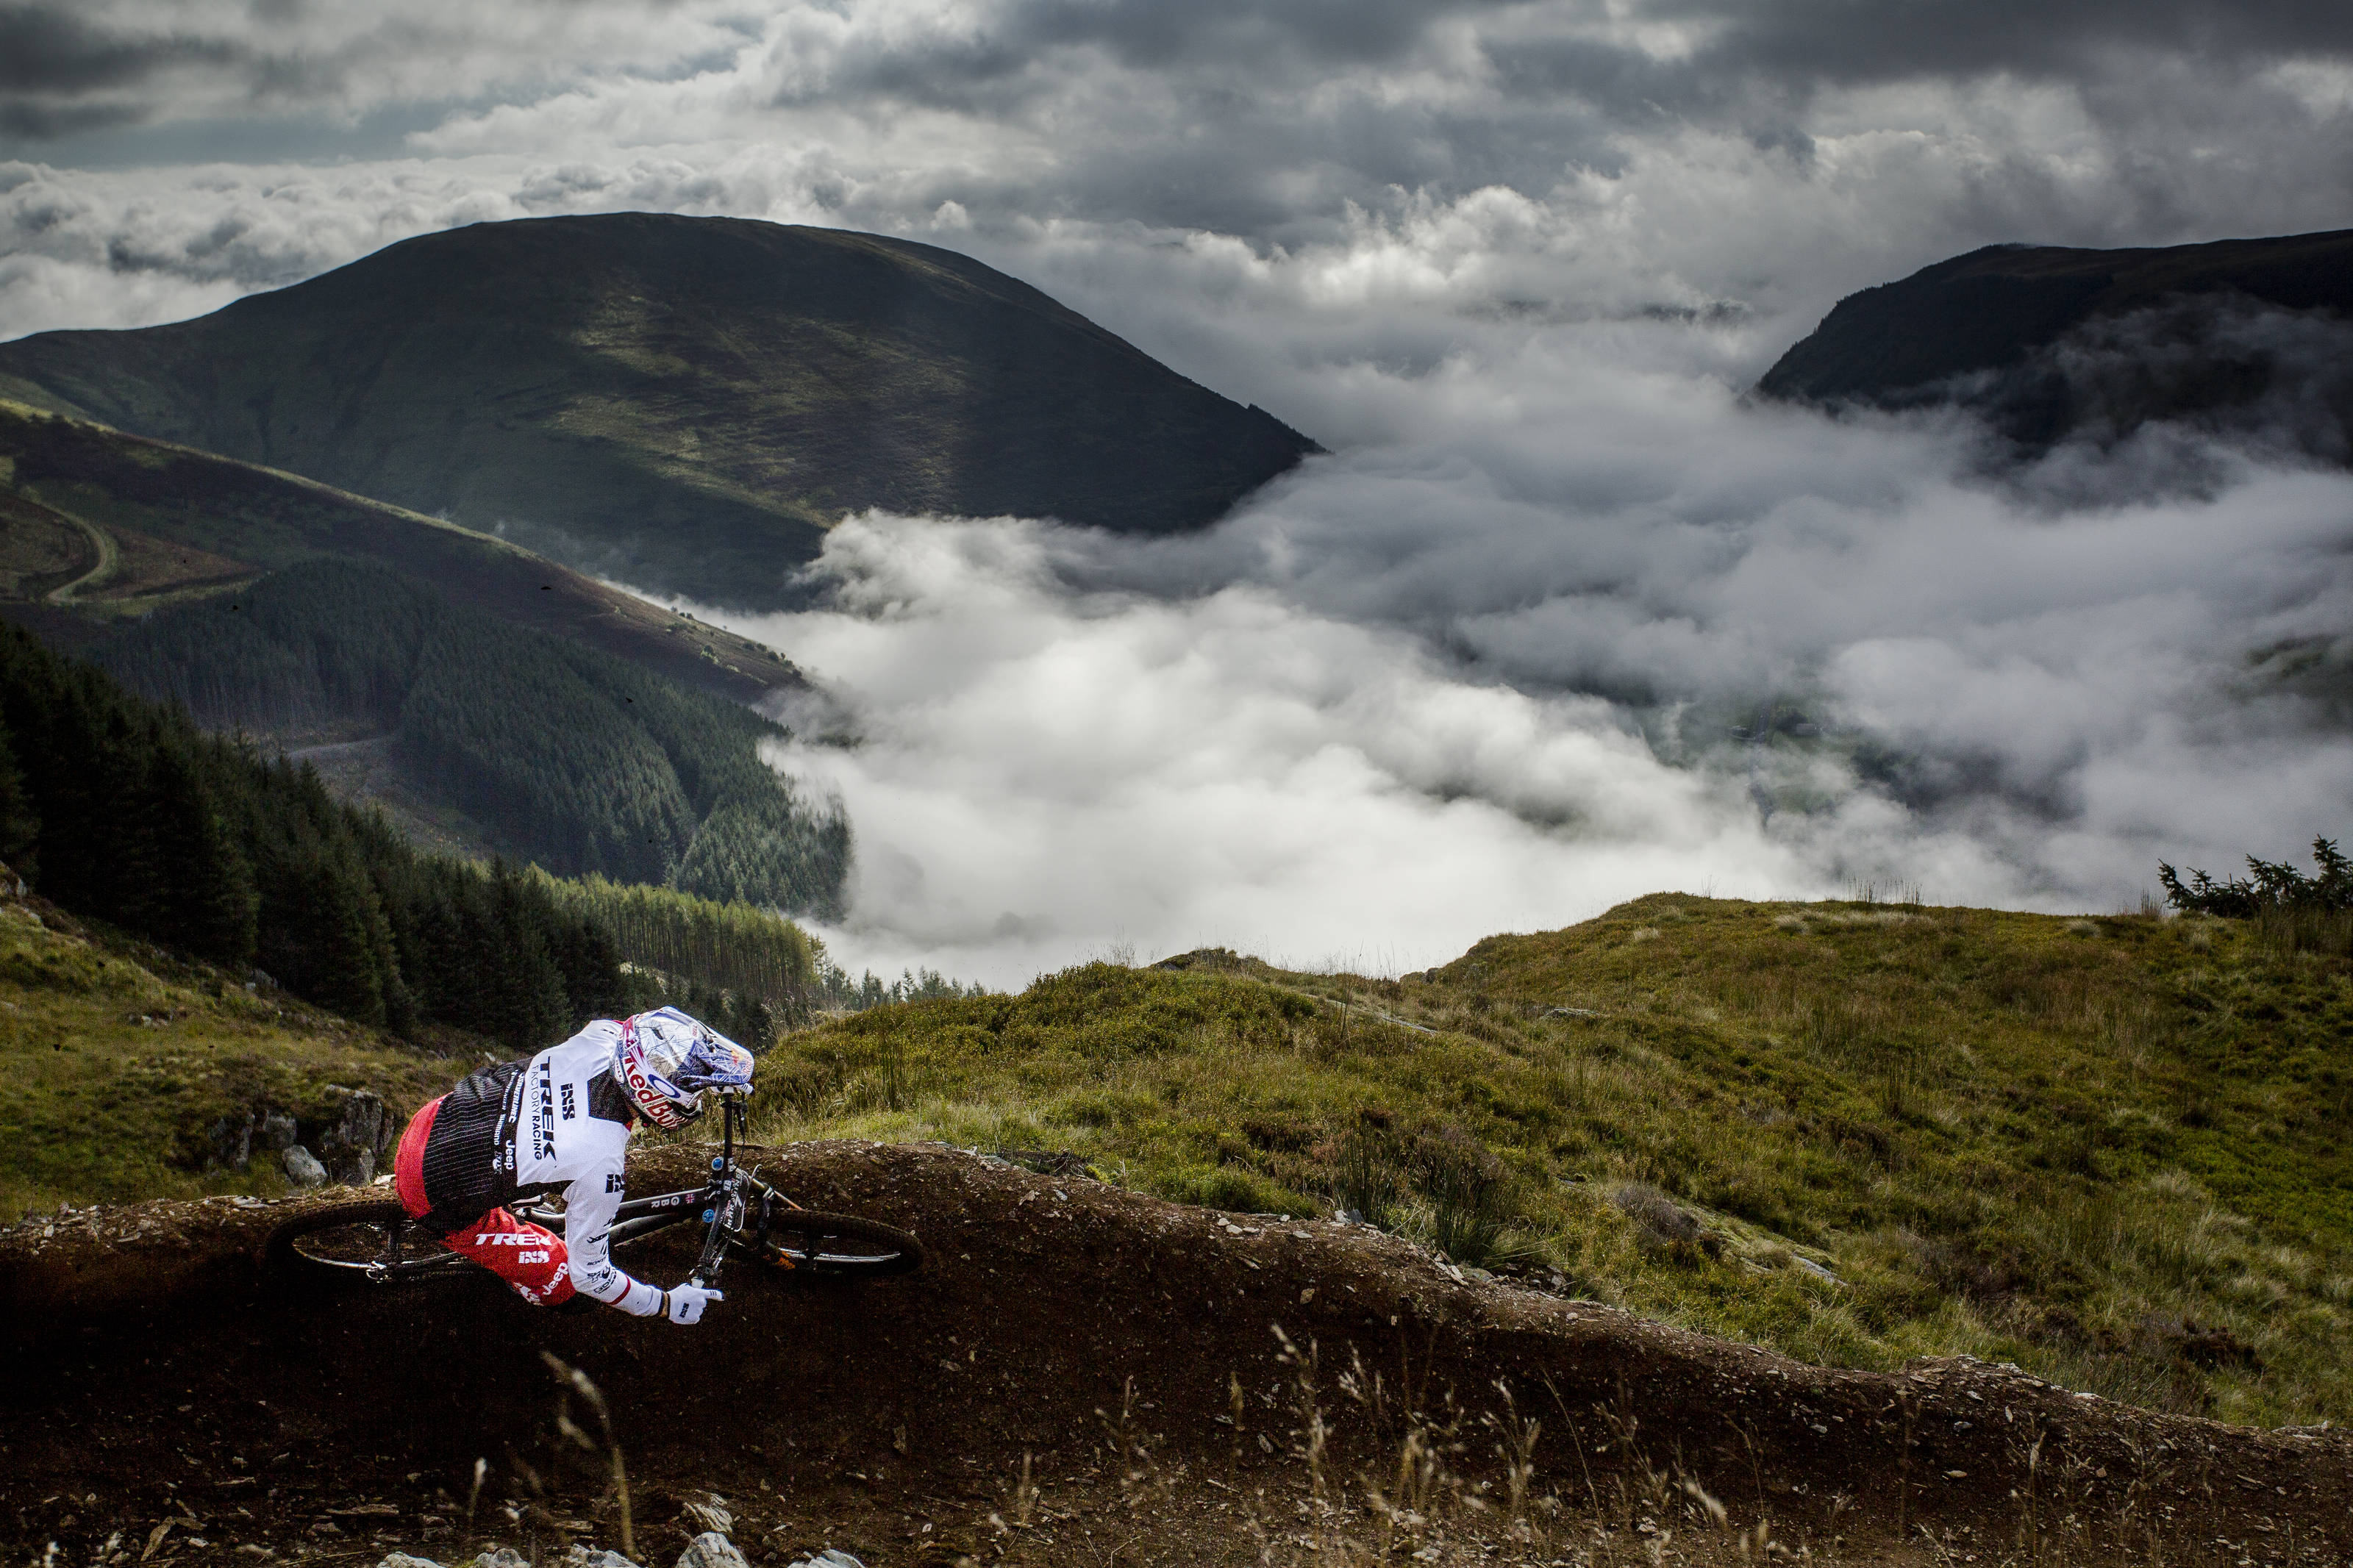 Gee Atherton rides the top of the hardline course in front of beautiful scenery